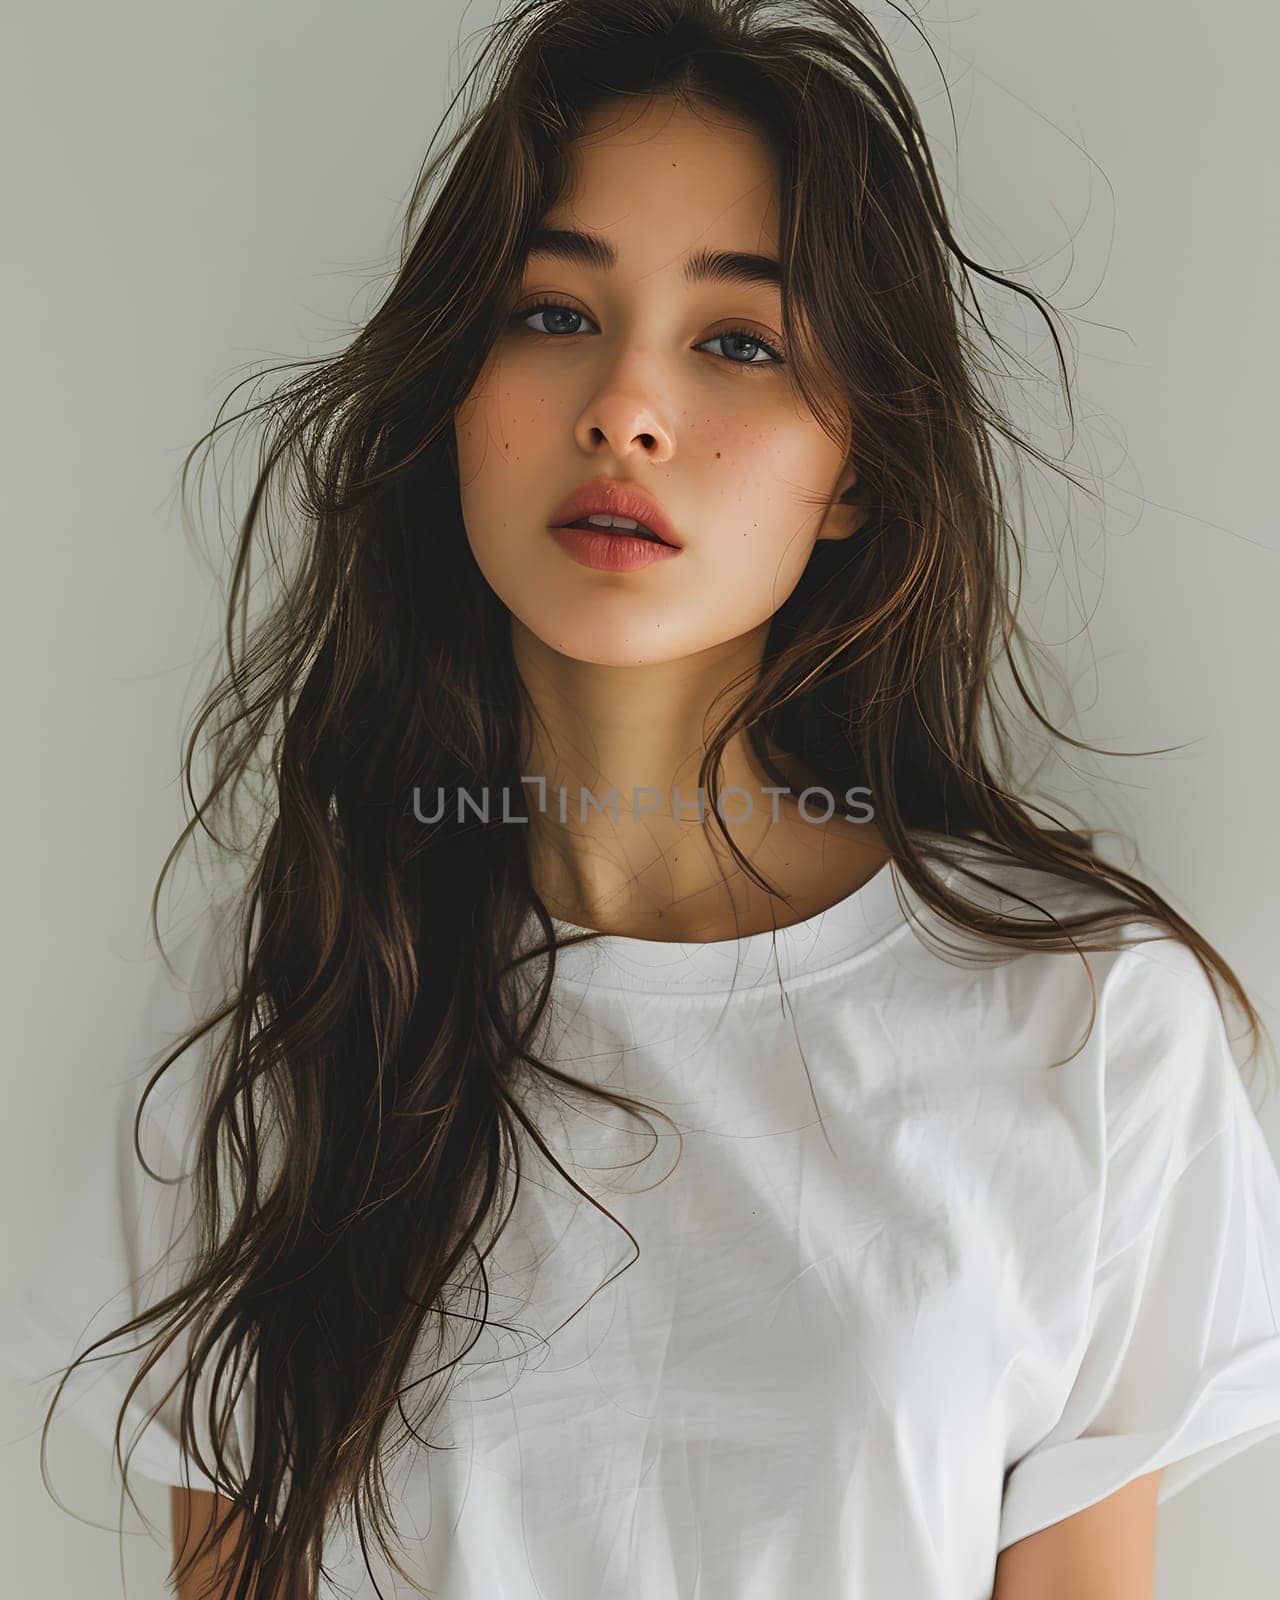 A woman with luscious long hair is donning a pristine white tshirt, showcasing her flawless skin, rosy cheeks, and pink lips